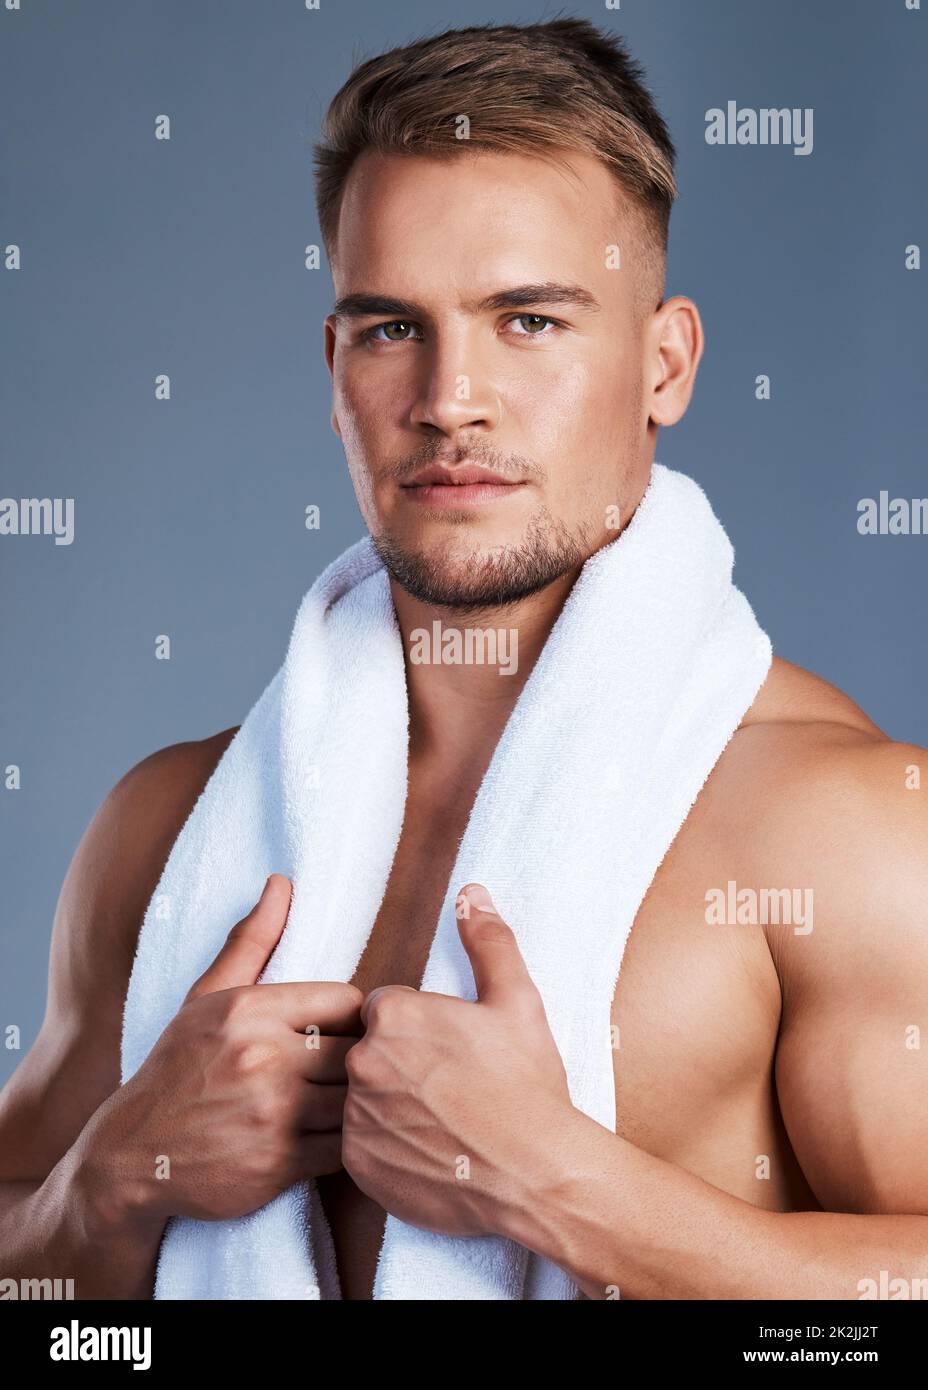 My skin is healthy and protected against dryness. Shot of a handsome young man posing with a towel around his neck. Stock Photo